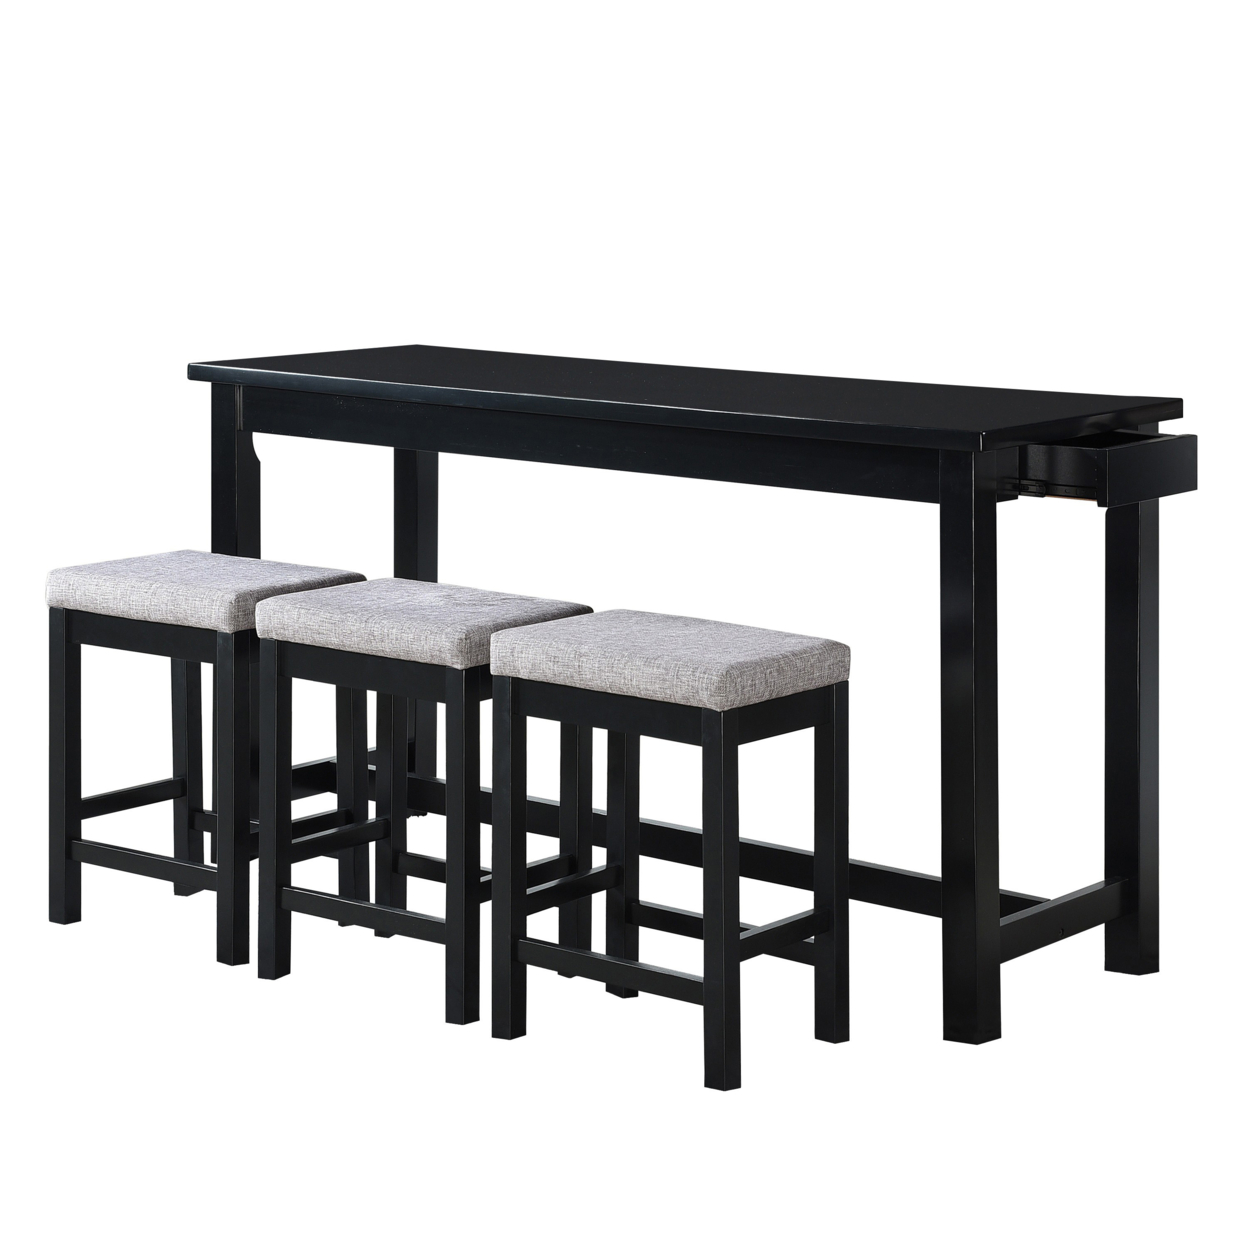 1 Drawer Counter Height Table With Backless Stools,Set Of 4, Black And Gray- Saltoro Sherpi